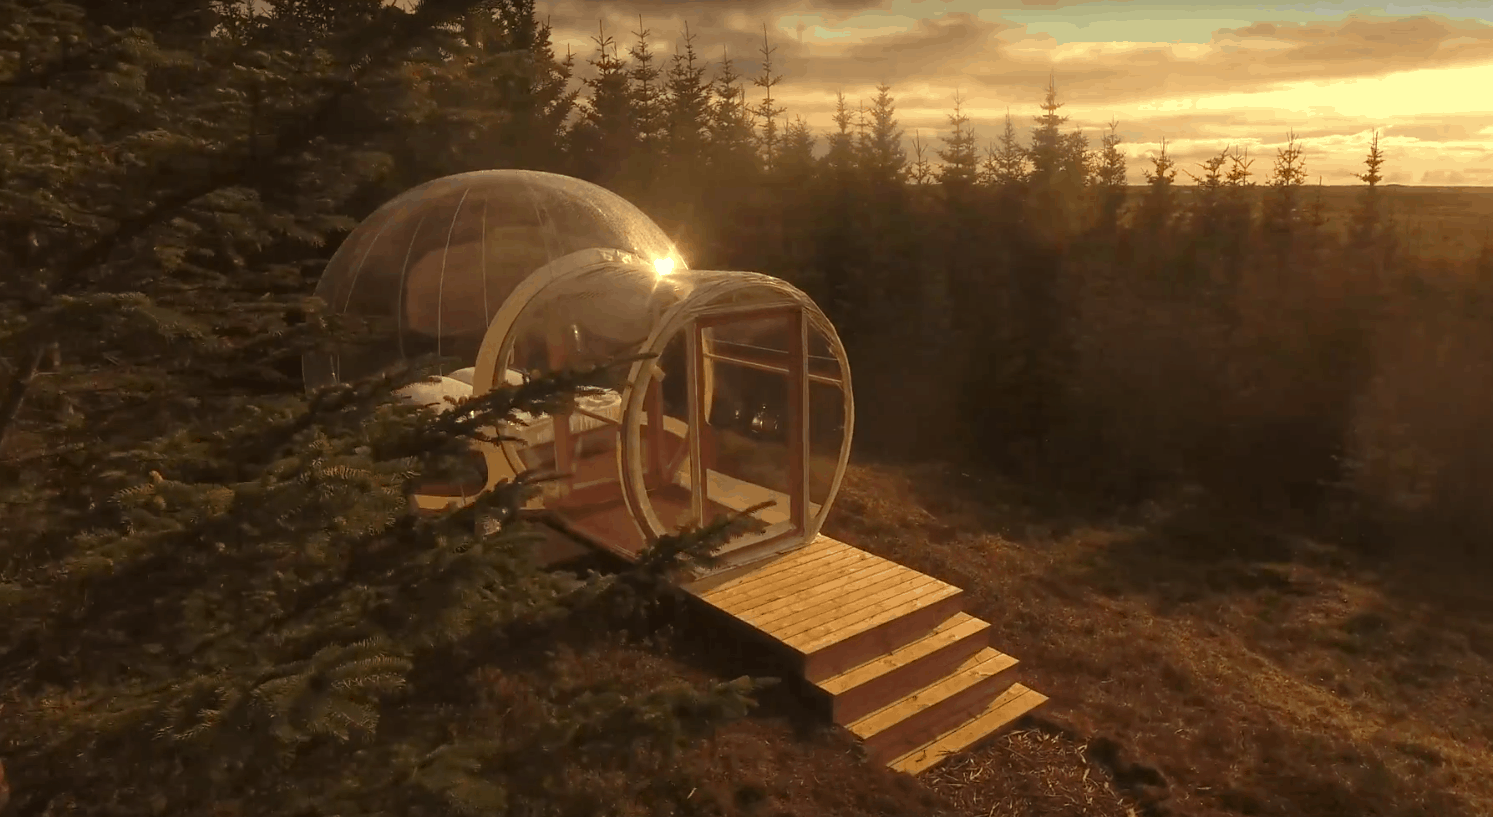 A bubble in the forest in Iceland